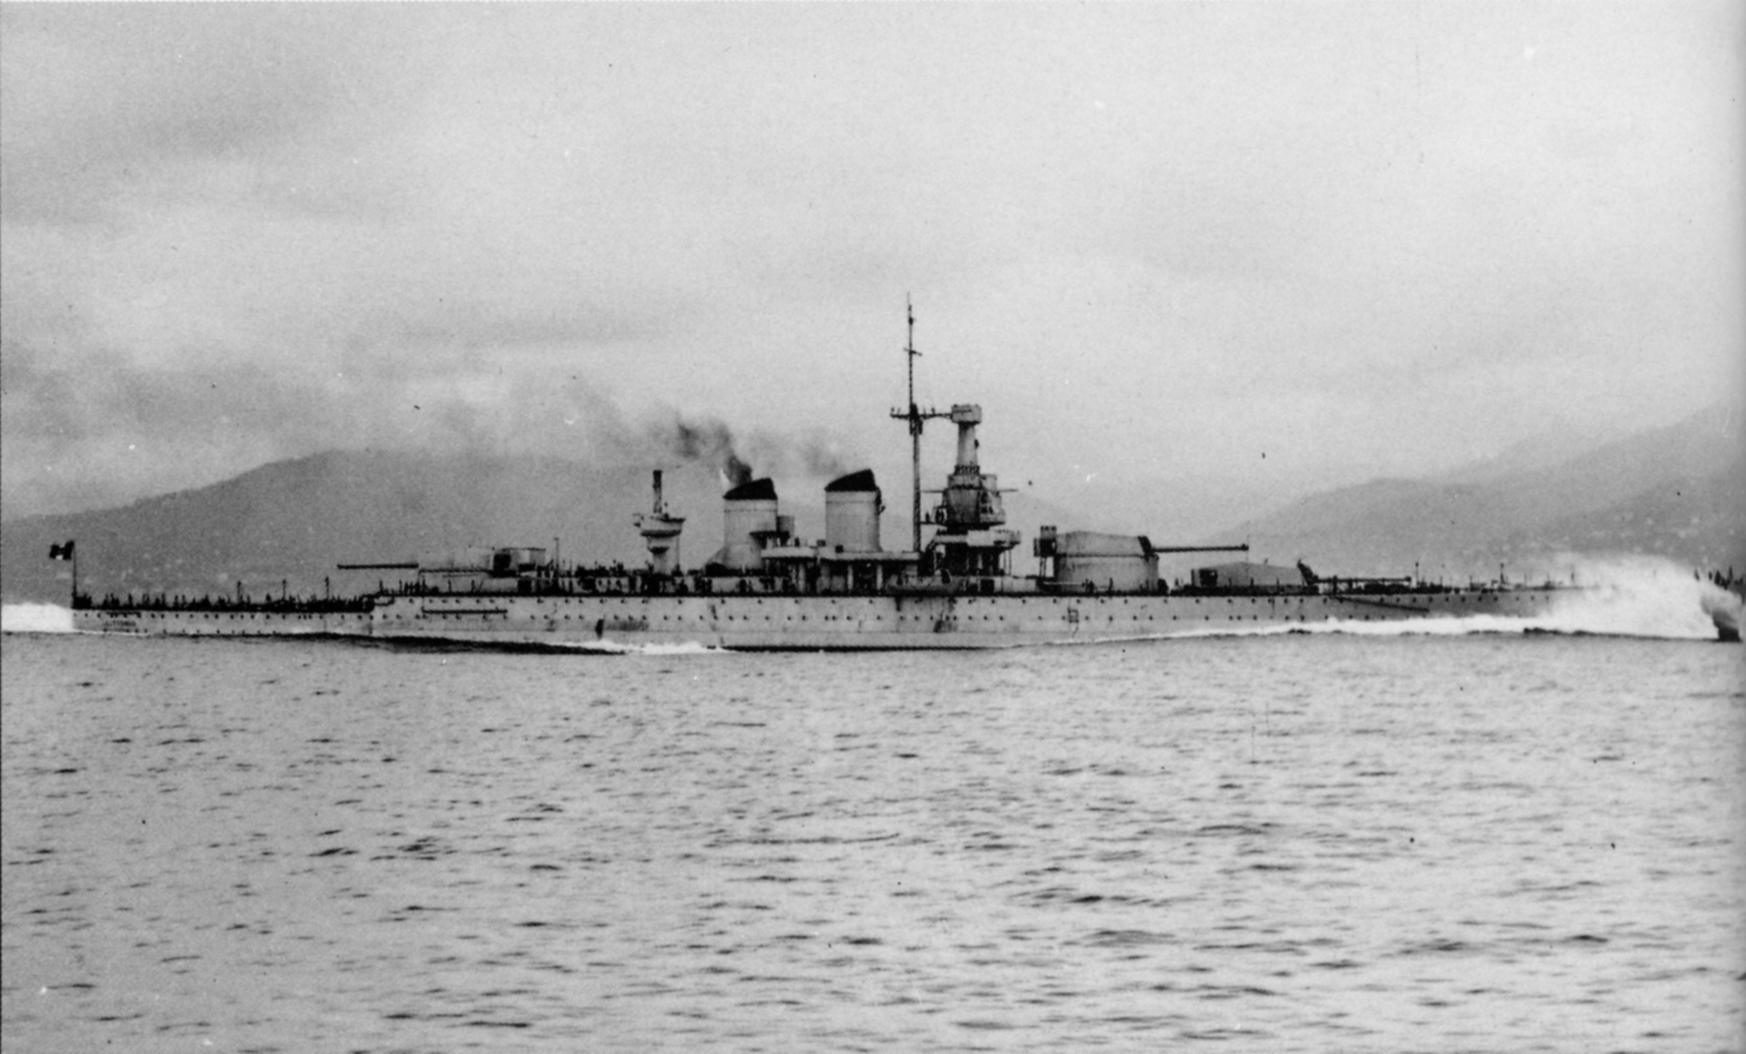 Littorio on trials in 1939 made 31.3kn.JPG